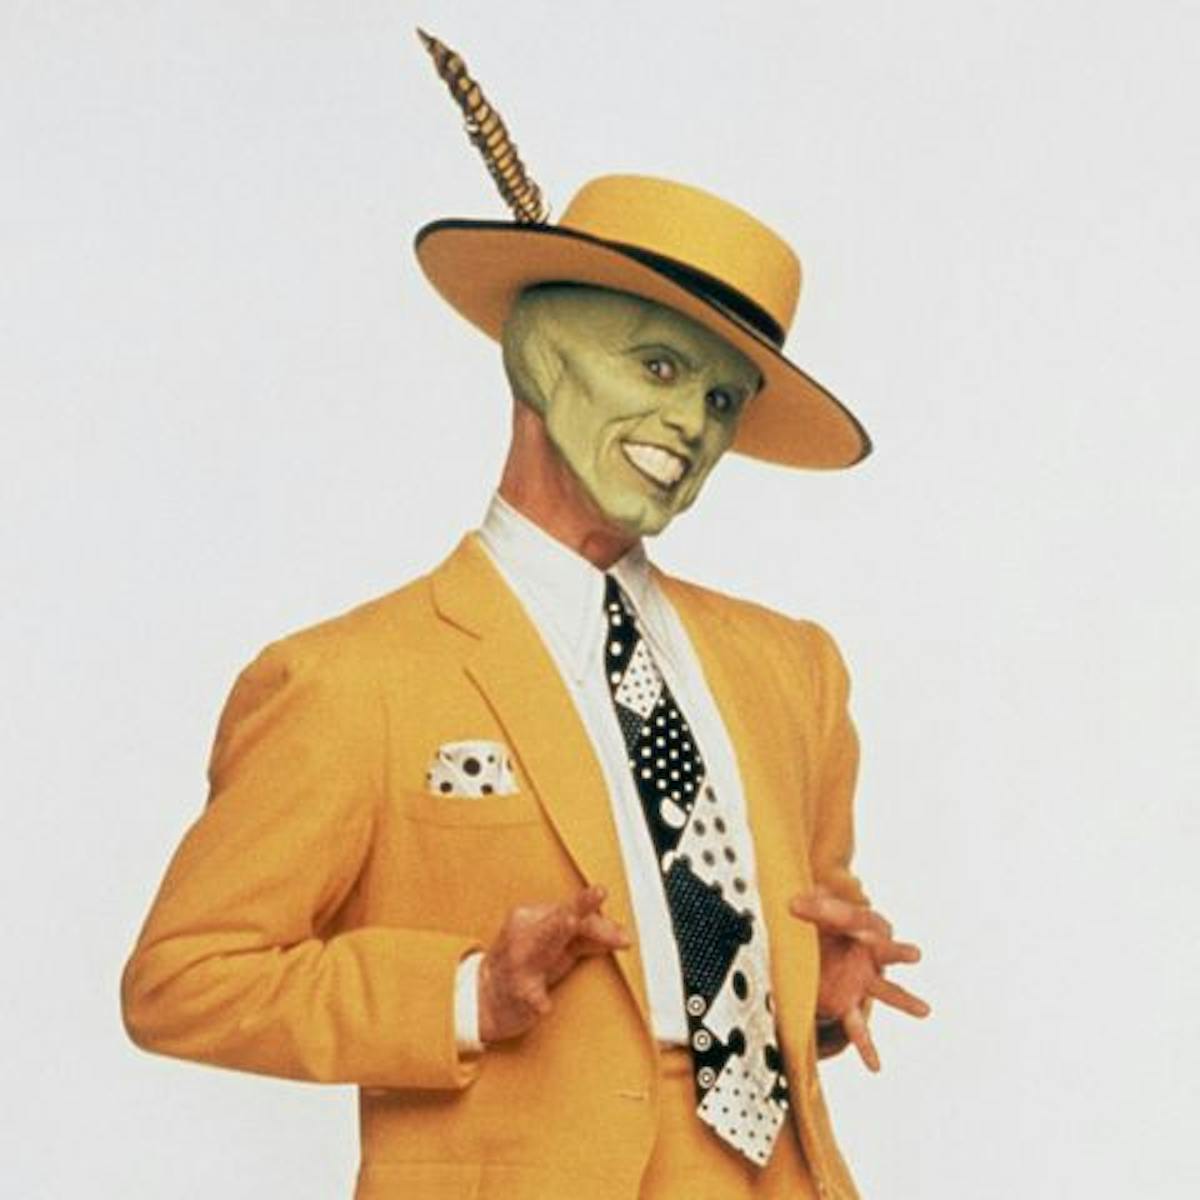  Jim Carry as The Mask